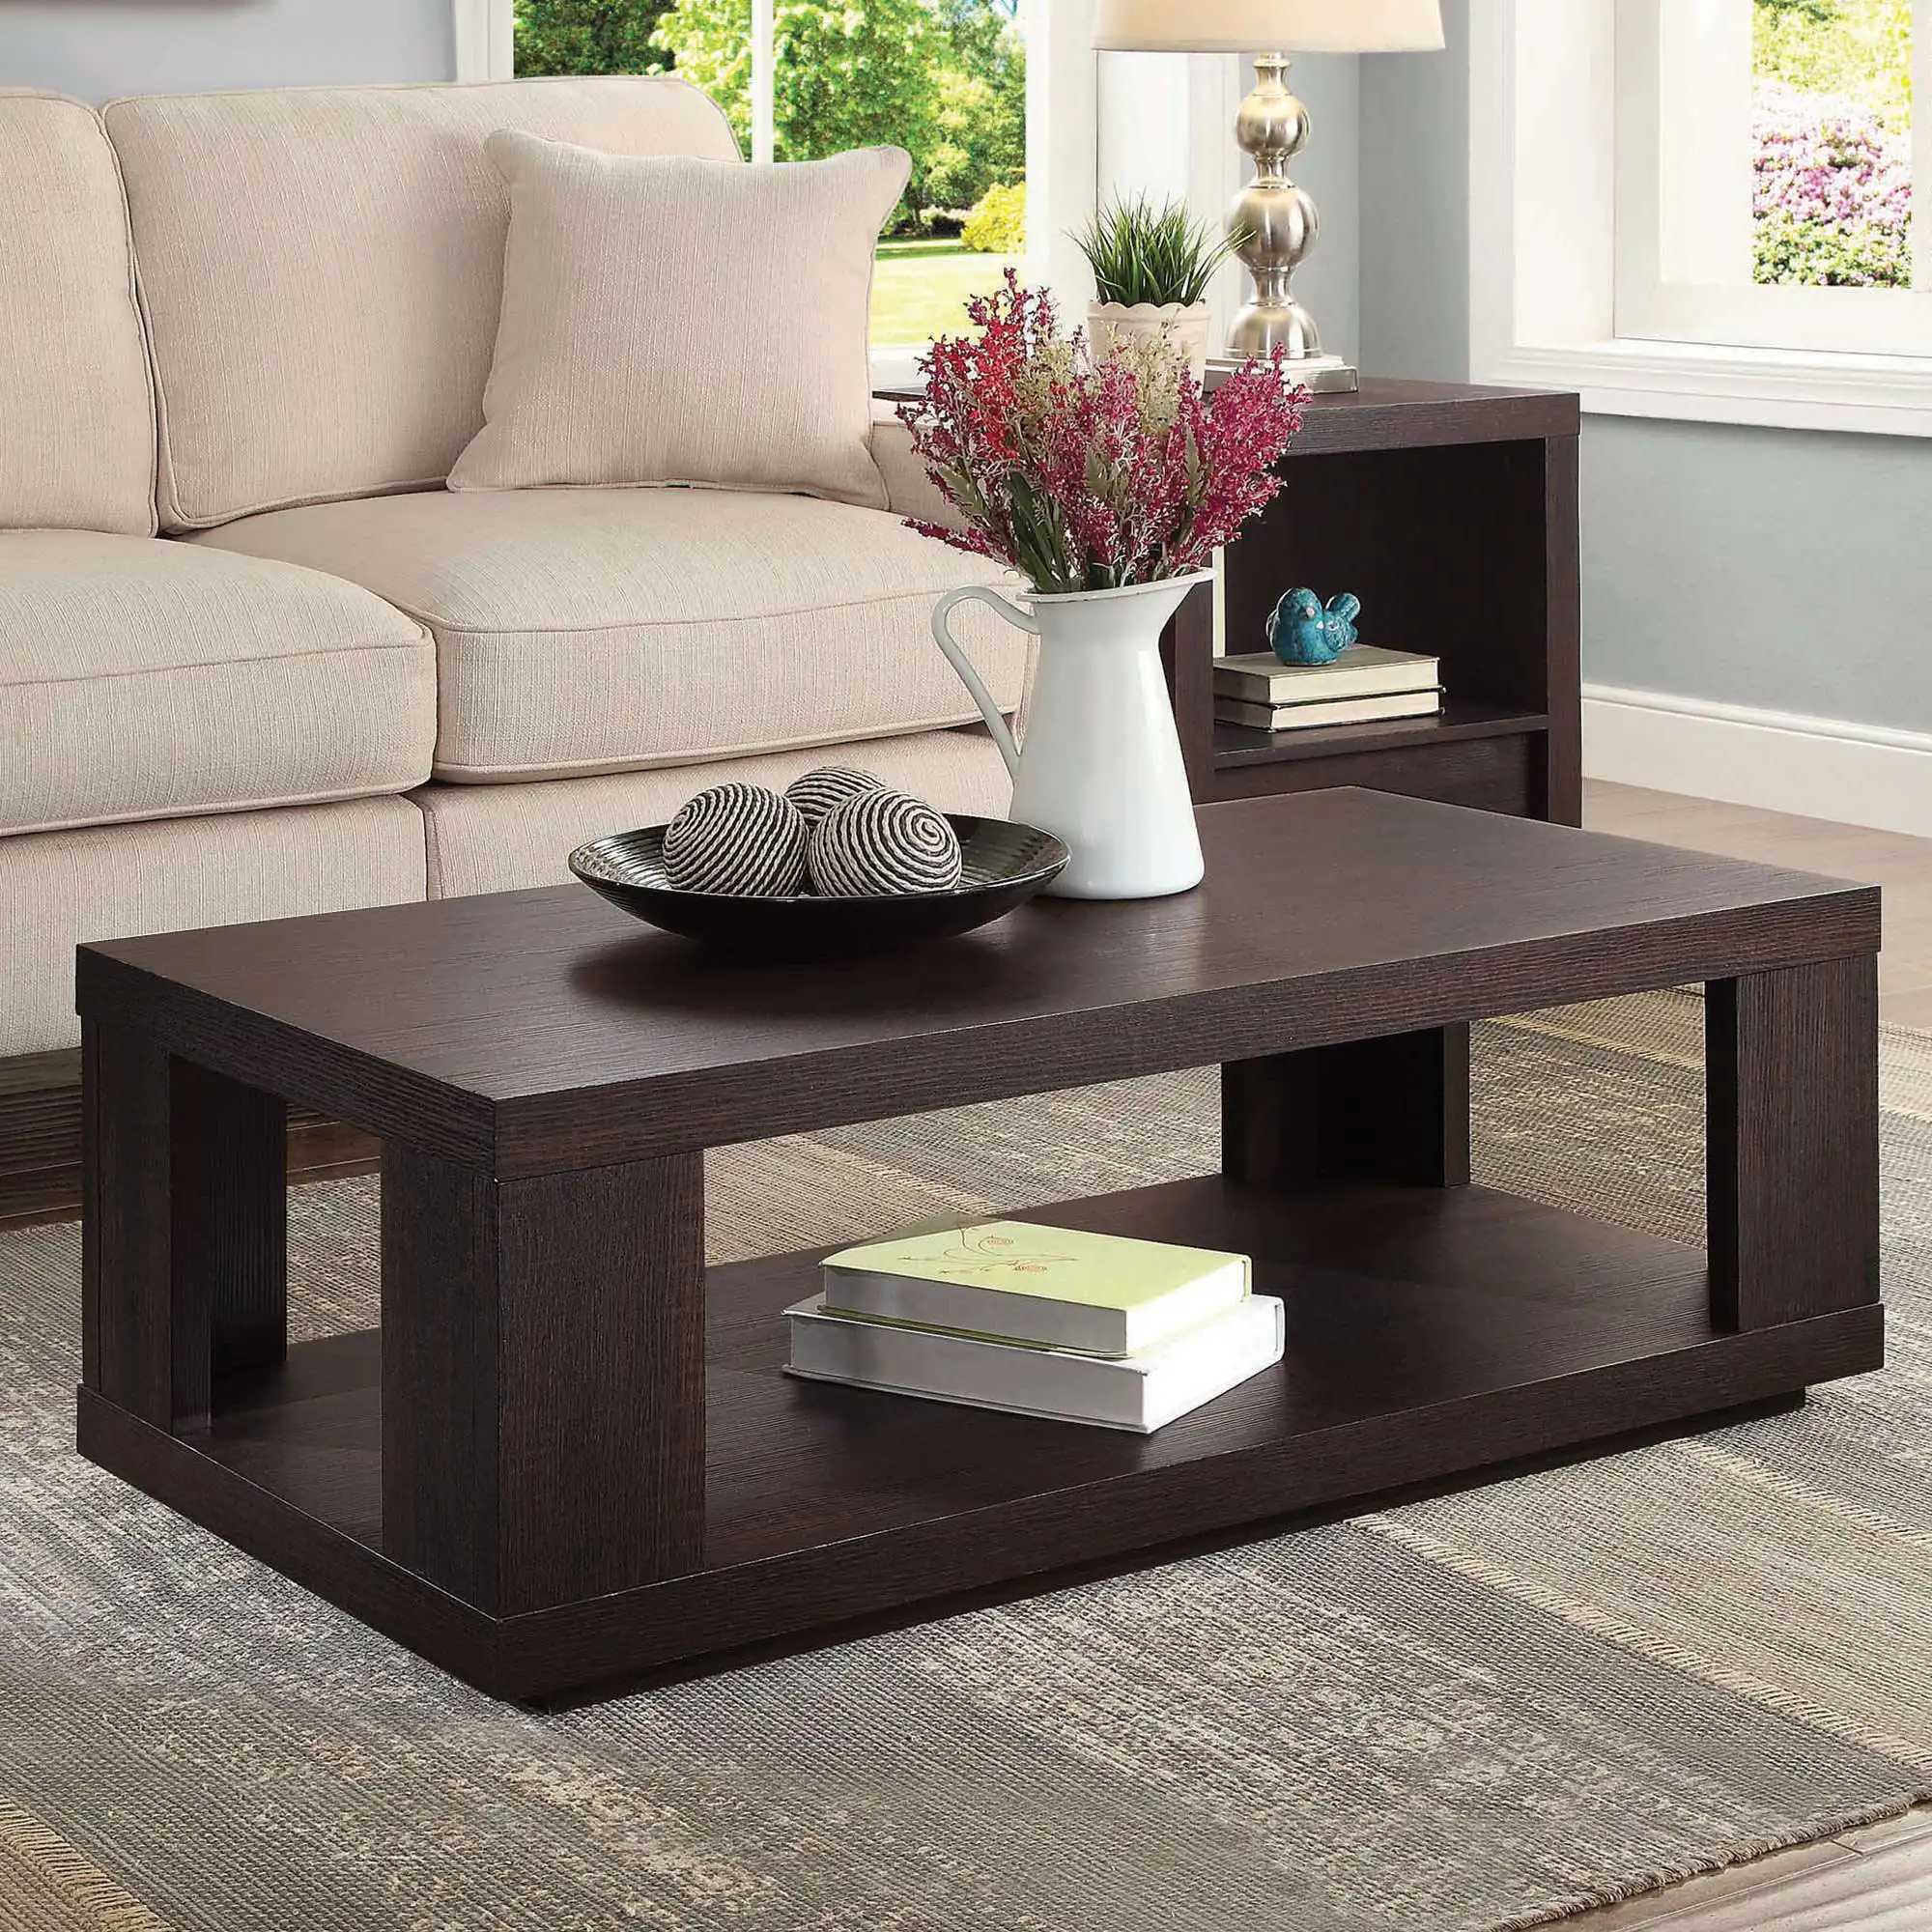 

Steele Coffee Table with Lower Shelf, Espresso Coffe Tables For Living Room Muebles Hogar Center Tables For Living Room